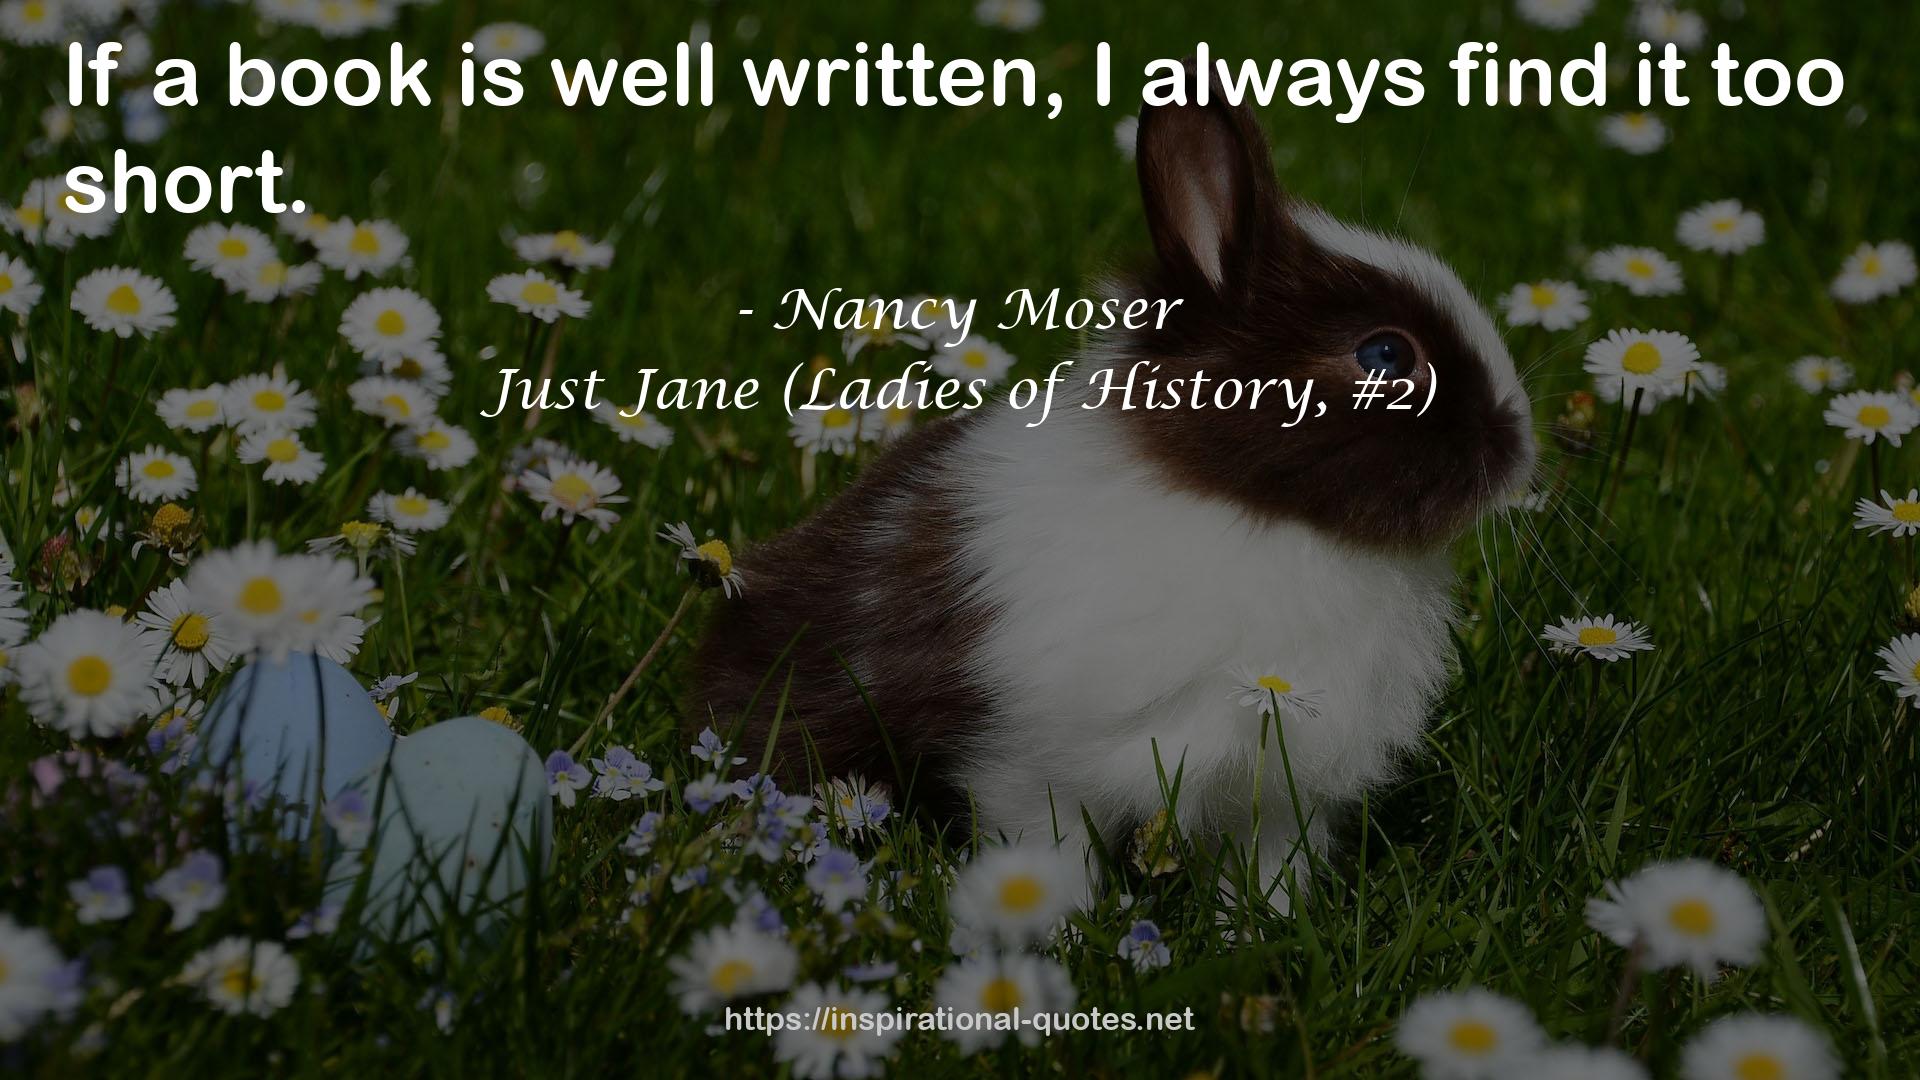 Just Jane (Ladies of History, #2) QUOTES